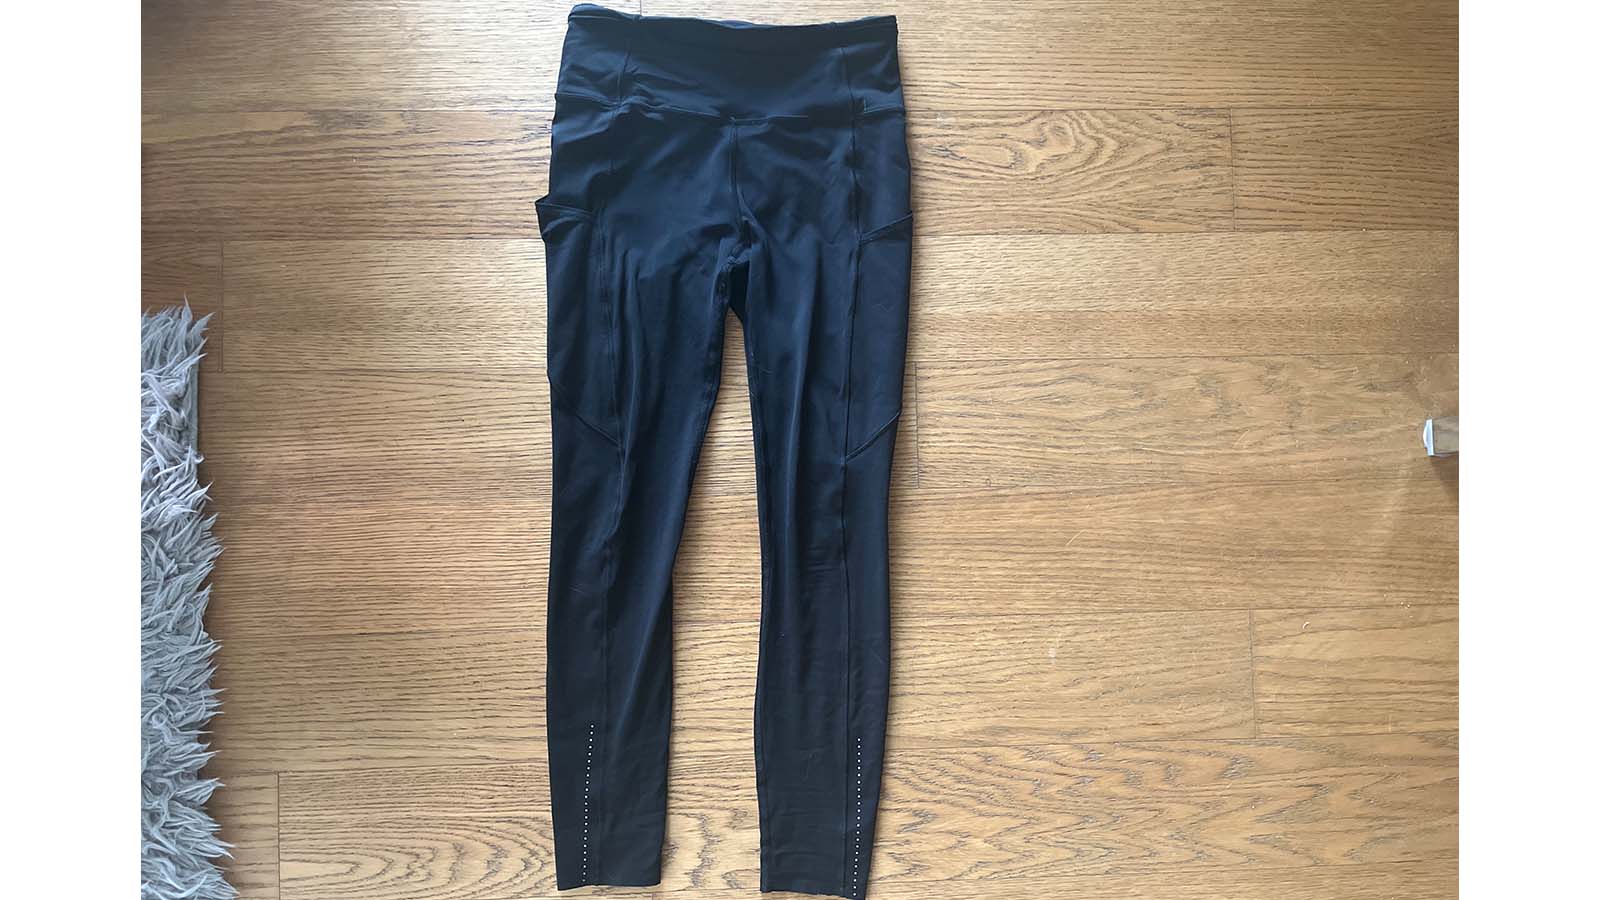 I tried new Lululemon dupes at Dunnes Stores - they're to die for